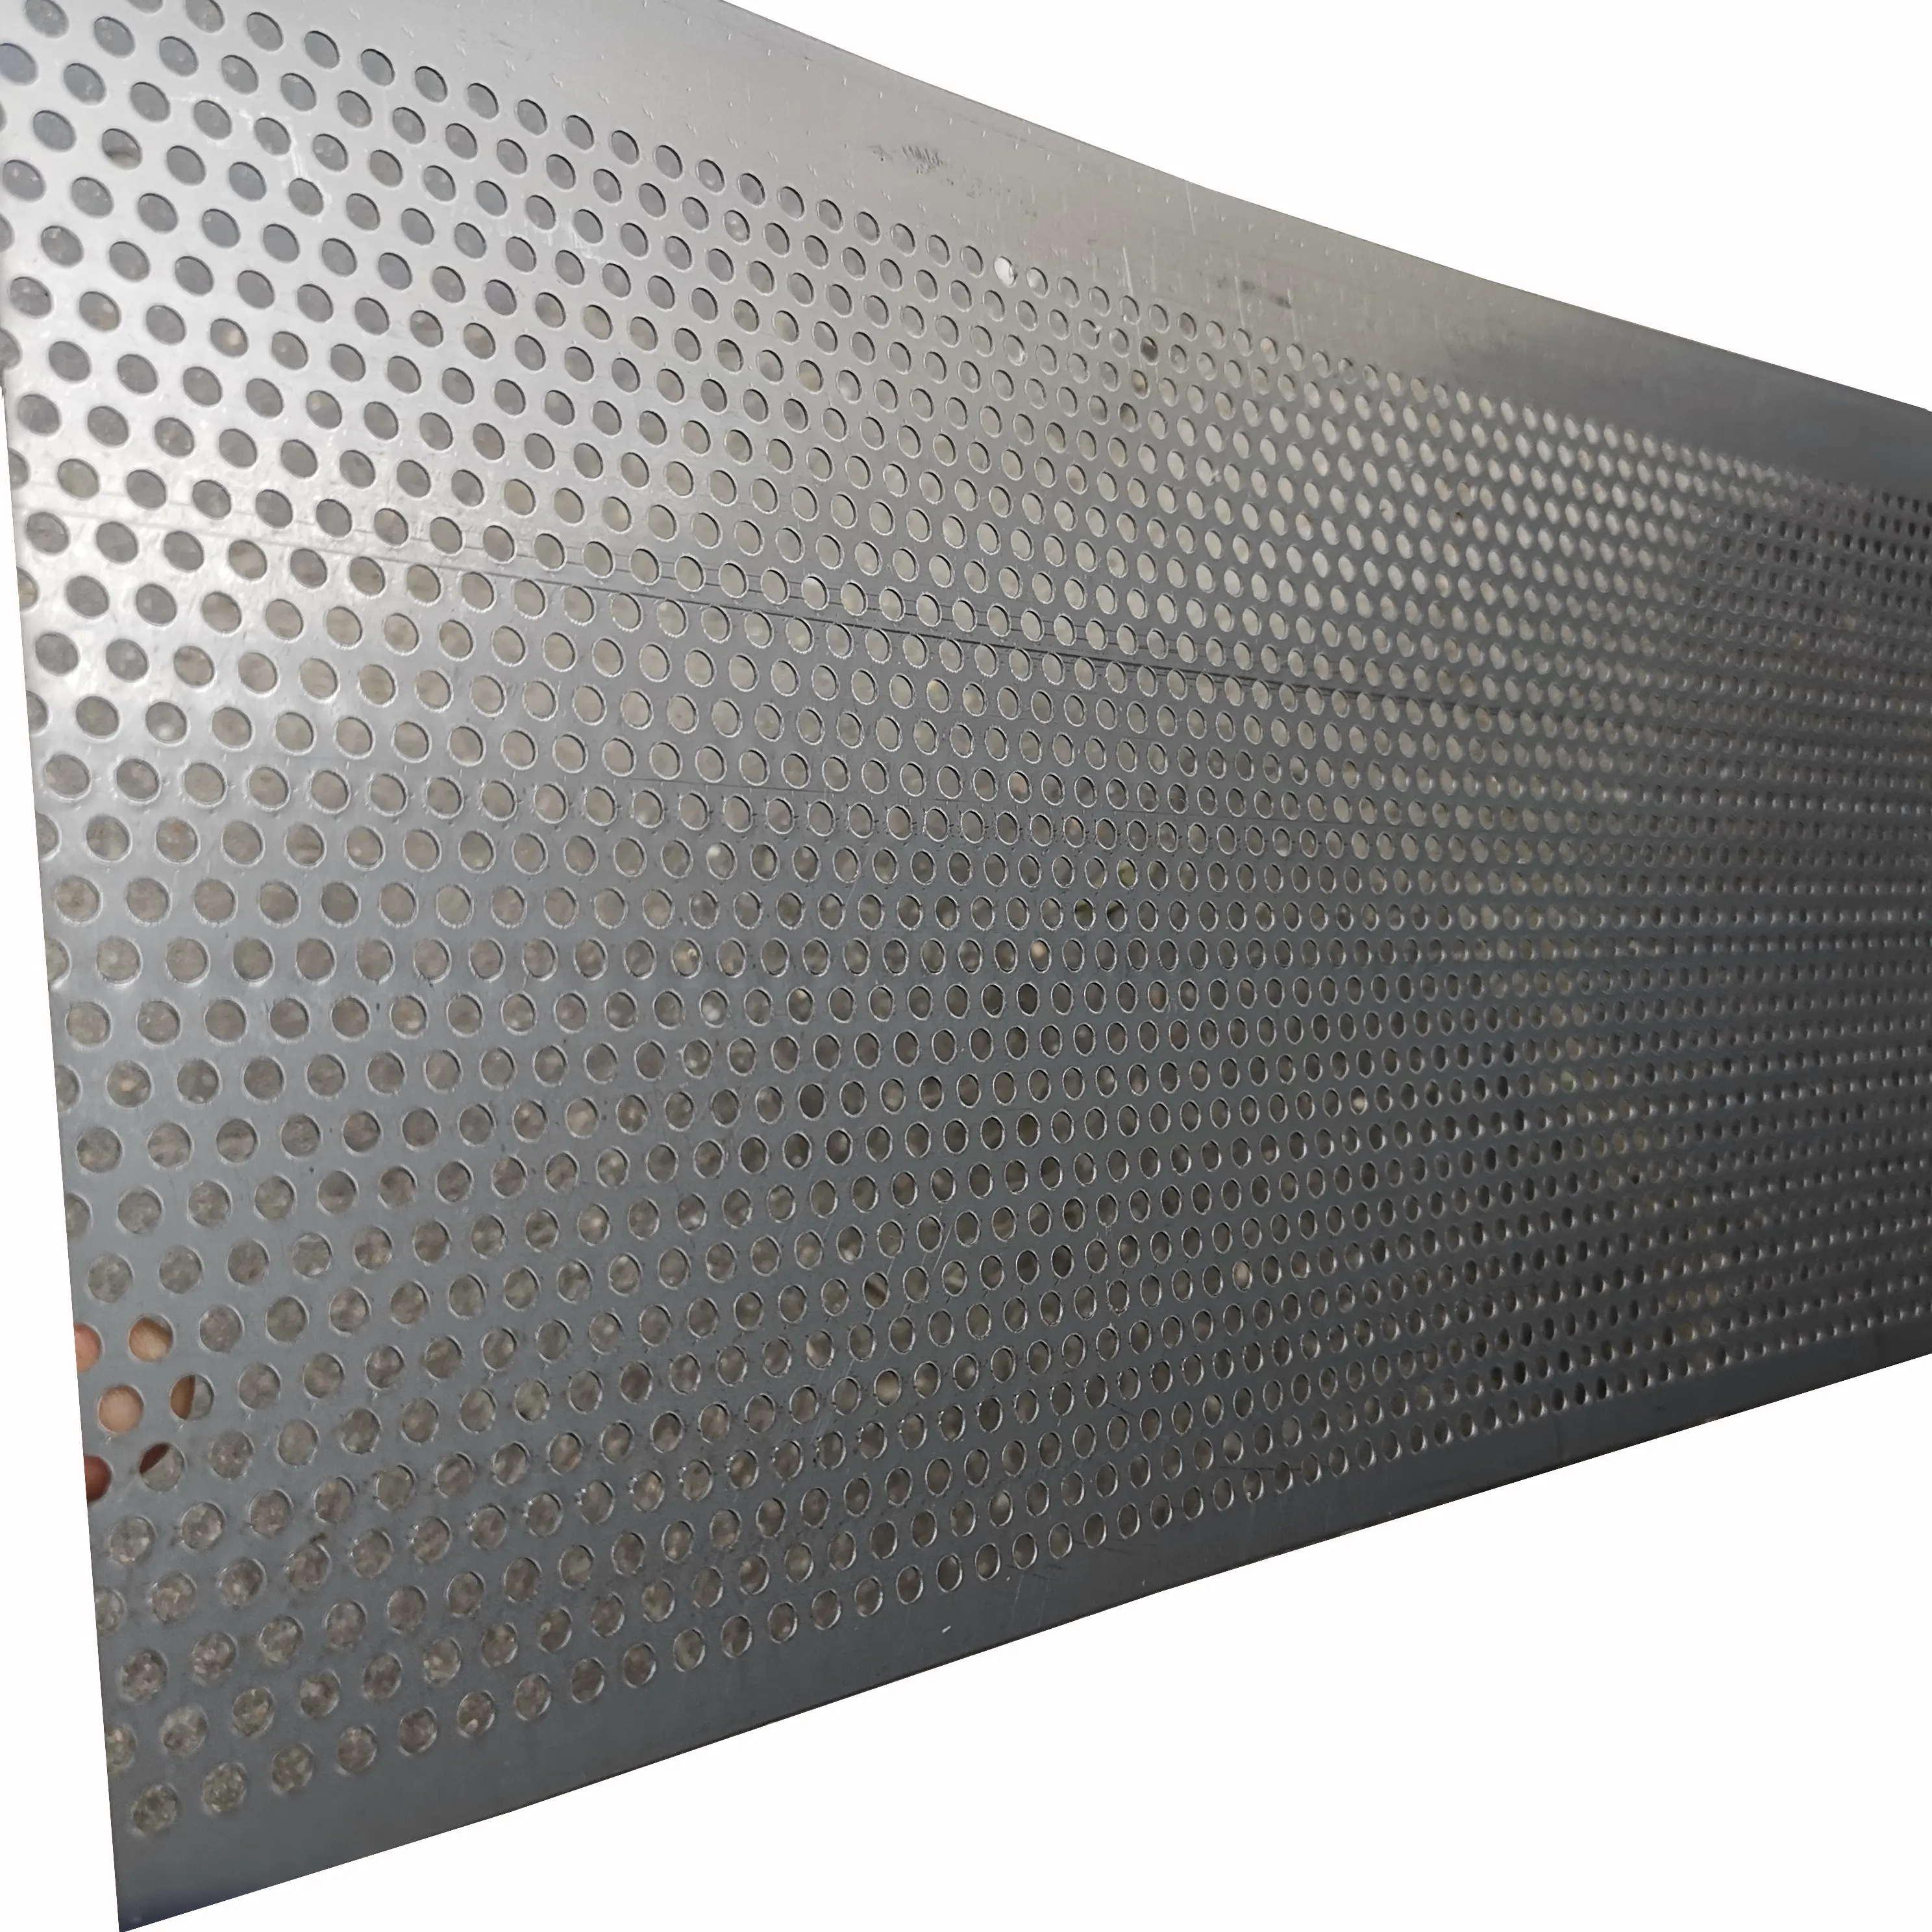 0.5mm Perforated Sheet Metal 3mm Perforated Metal Sheet 304 Stainless Steel Punching Plate Metal Mesh Punched Mesh